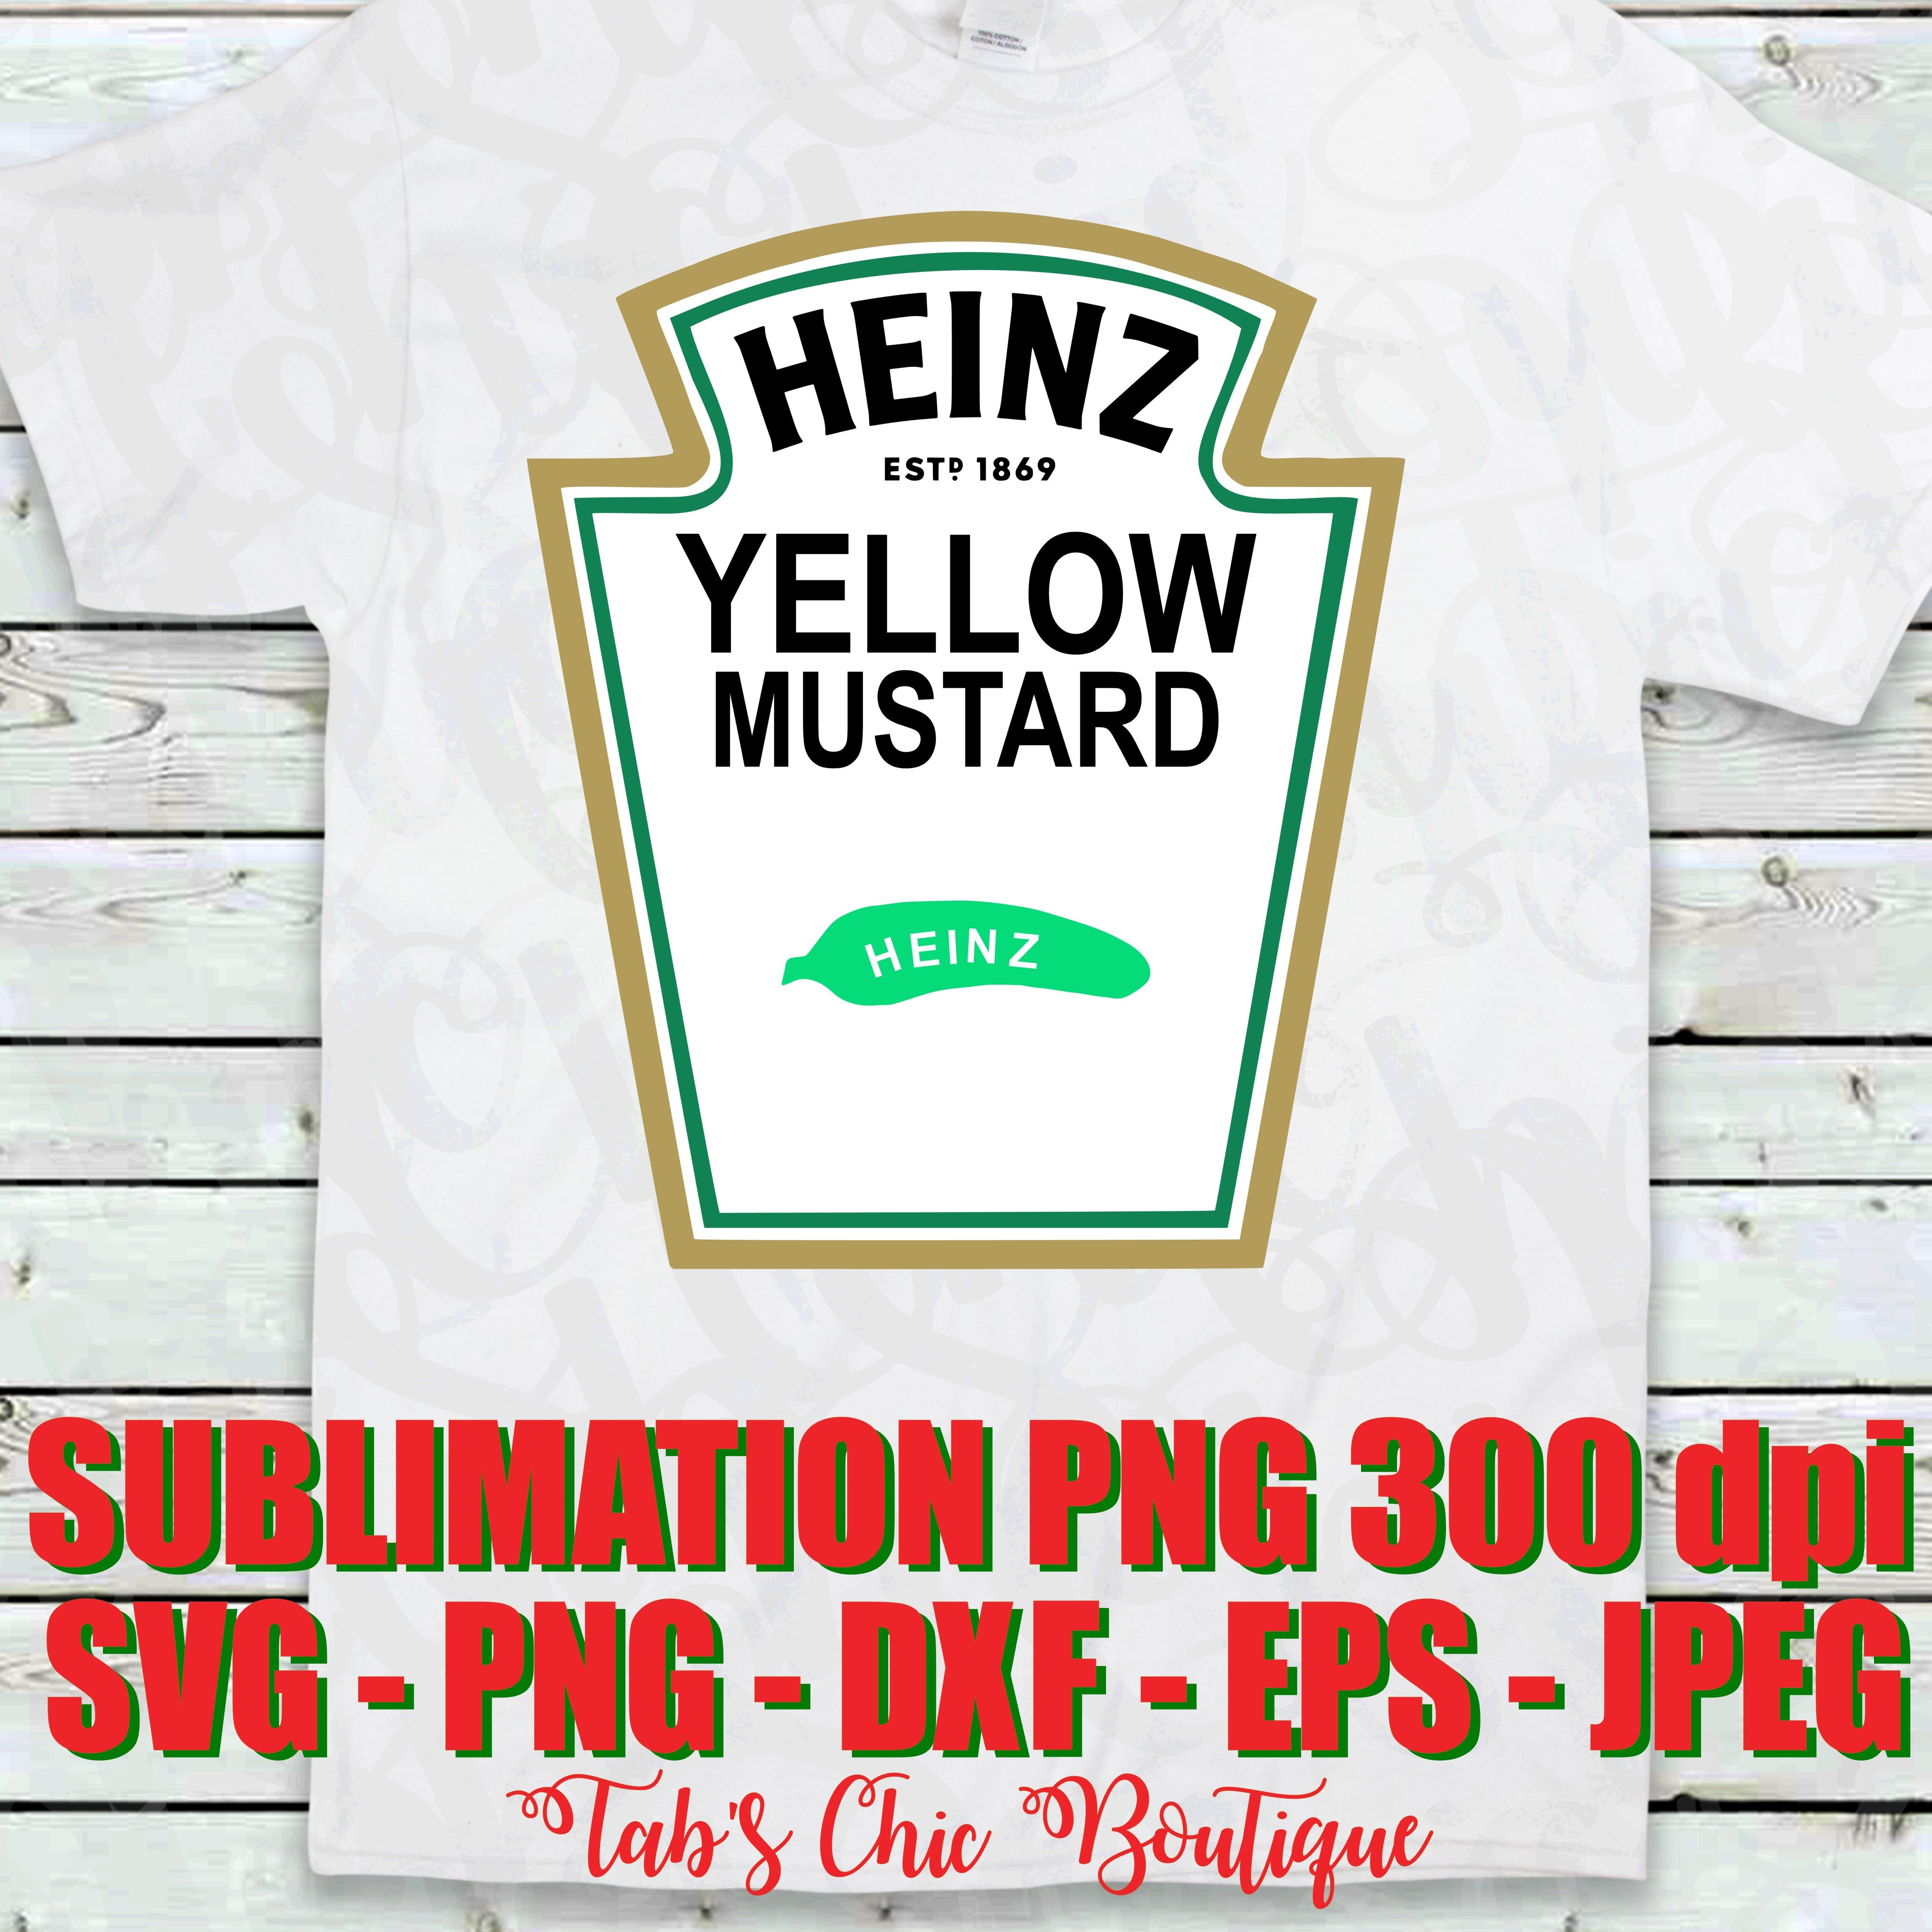 Download Heinz Yellow Mustard Logo Svg Jpeg High Def Png 300 Dpi Dxf Eps Sublim Tab S Chic Boutique